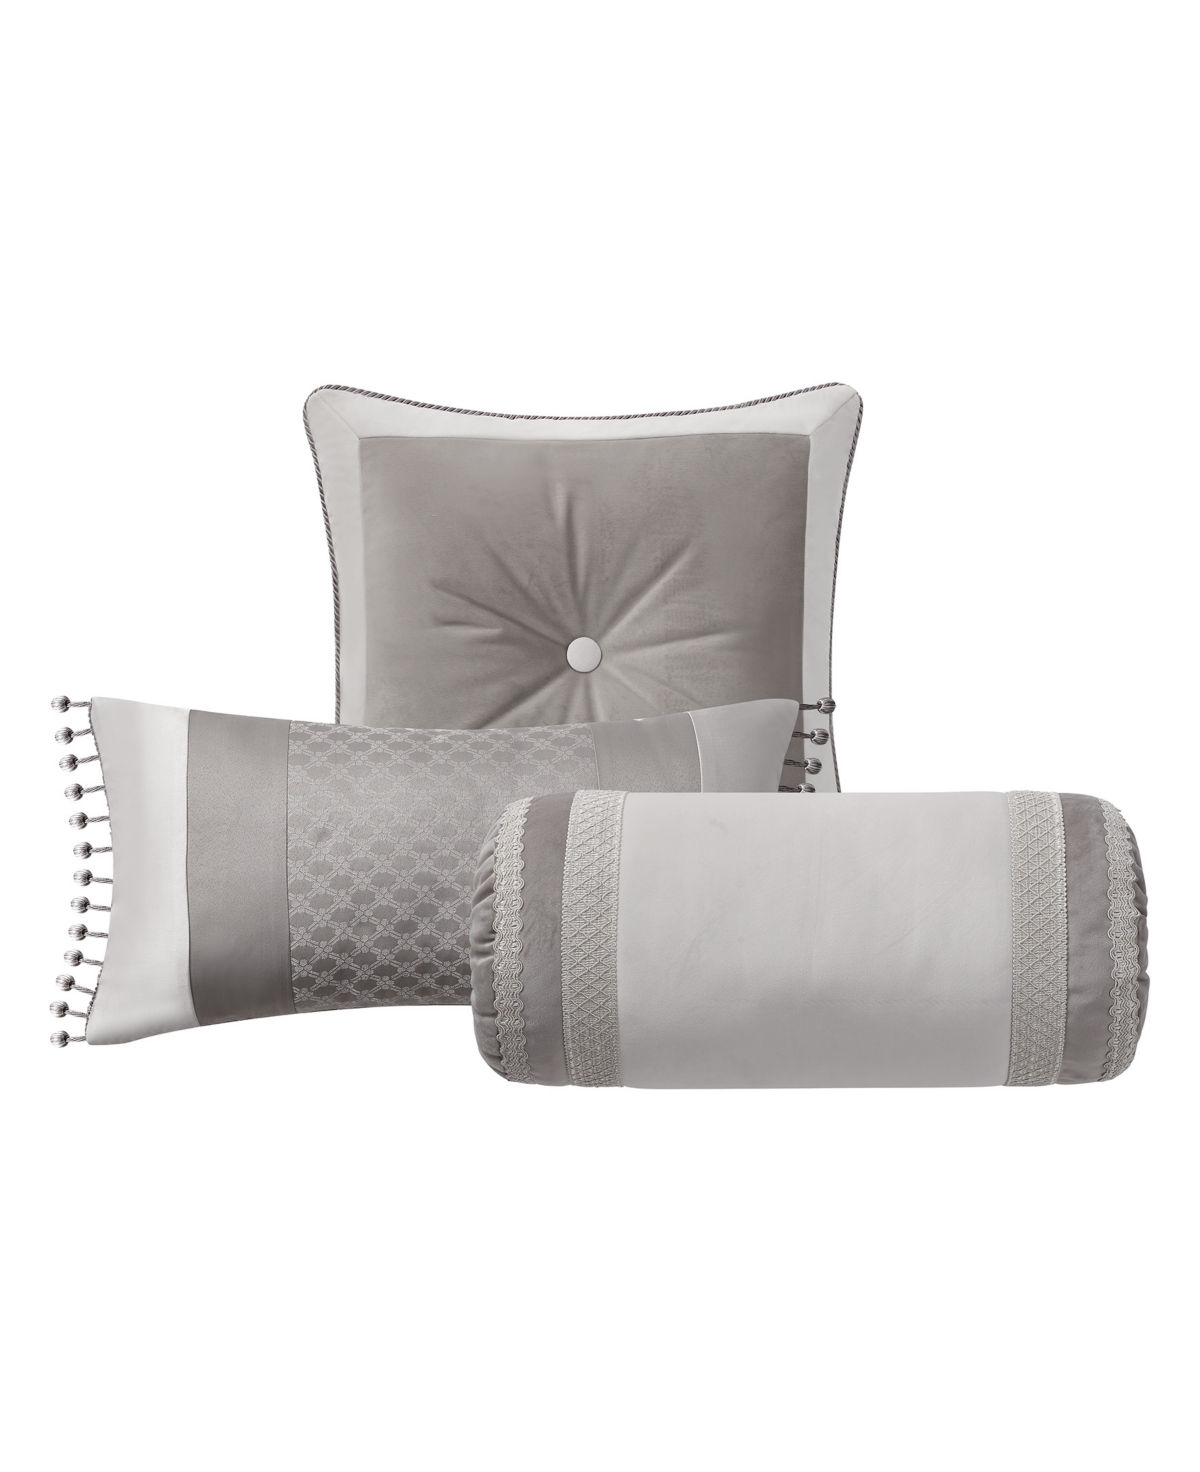 Waterford Palace Decorative Pillows, Set Of 3 In Mocha